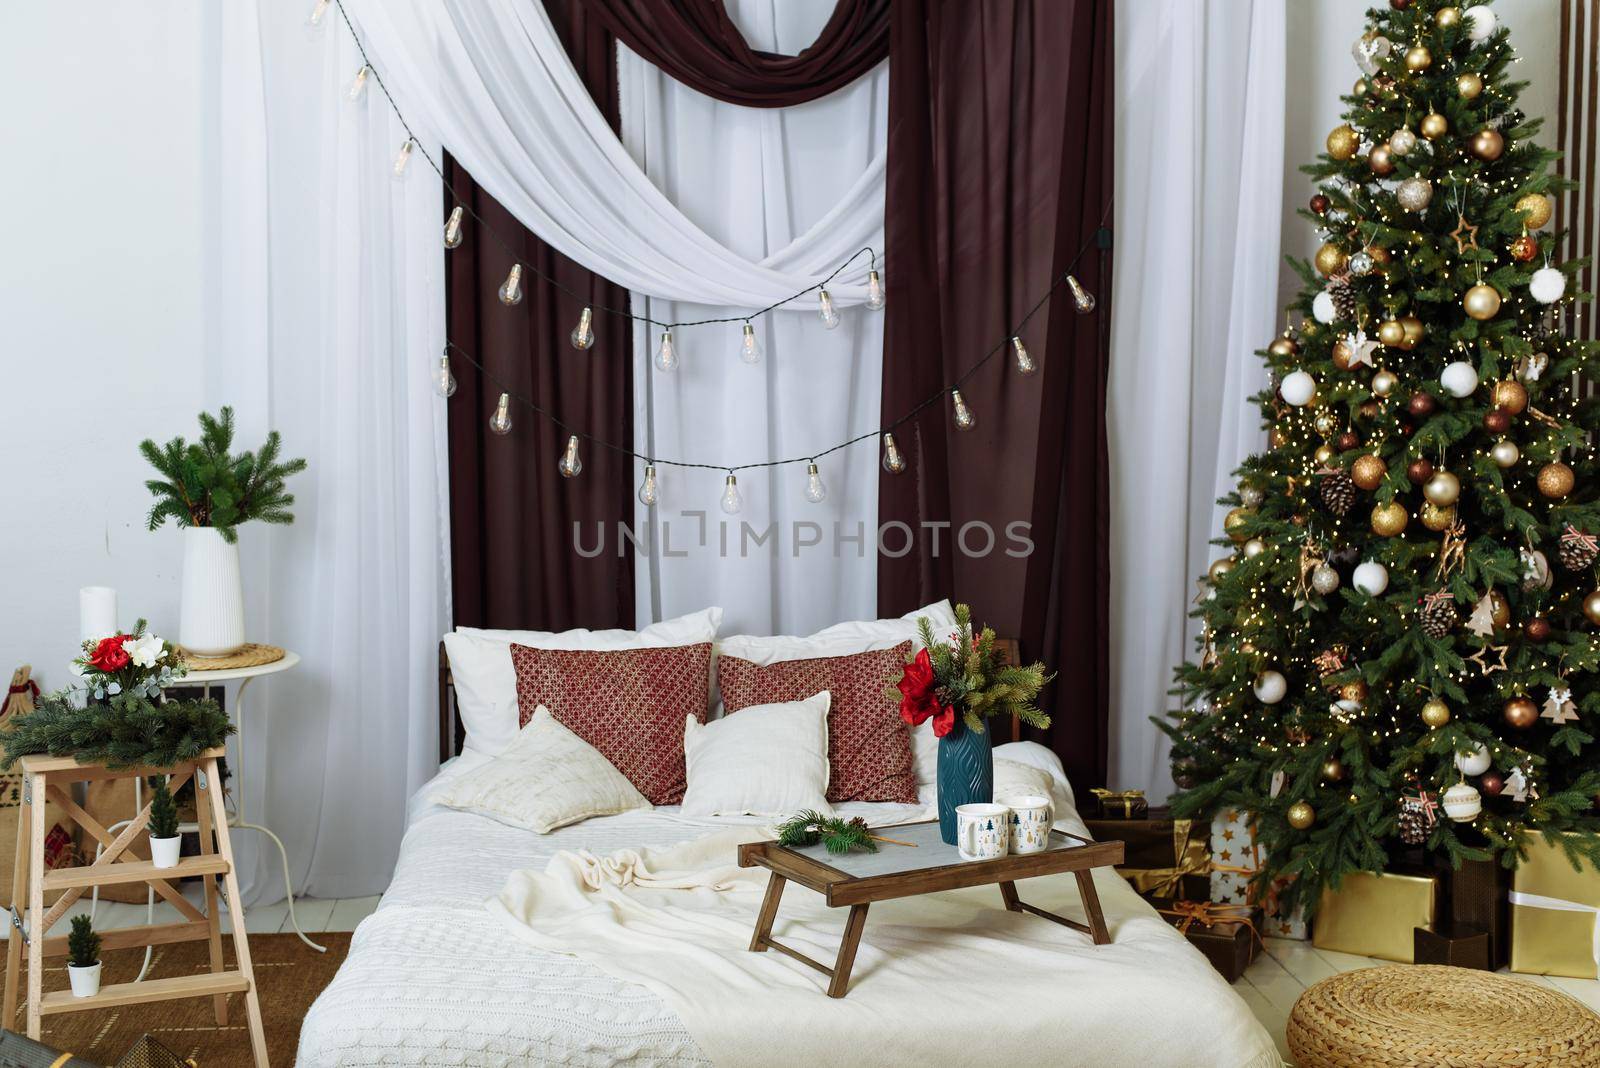 The interior of a modern bedroom is decorated for Christmas. Christmas tree in the apartment